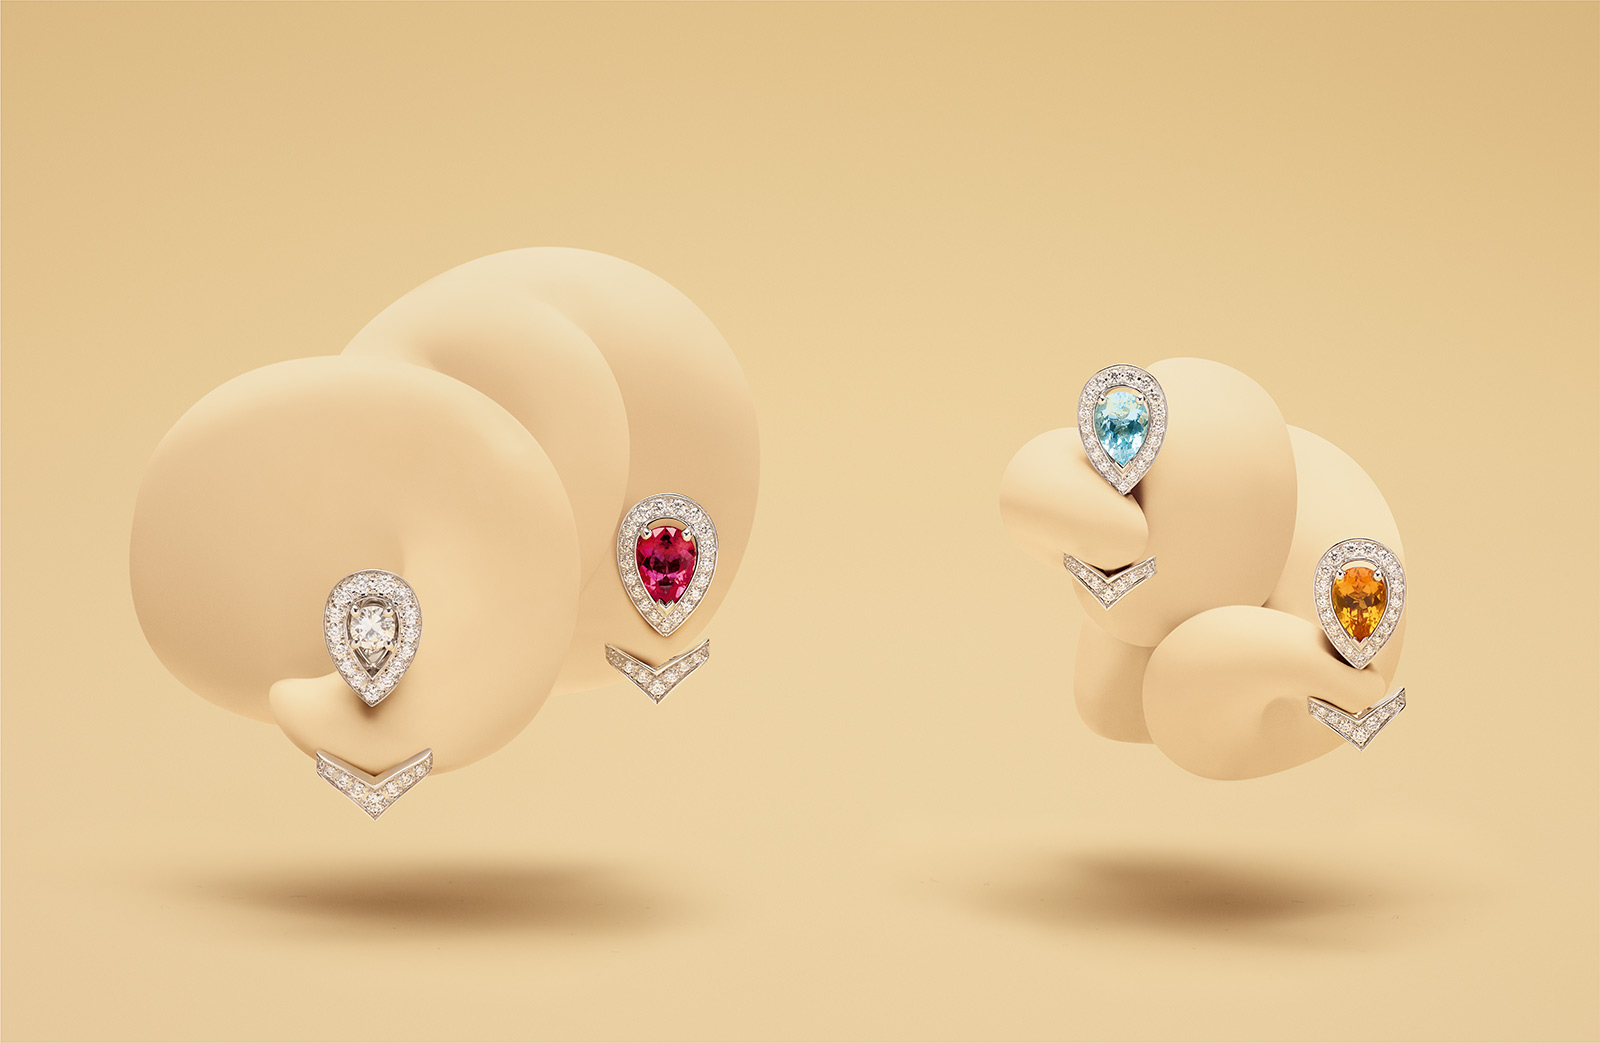 Chaumet 'Joséphine Aigrette' earrings and jackets with 0.60ct of; rhodolite garnet, aquamarine and citrine, all with diamonds